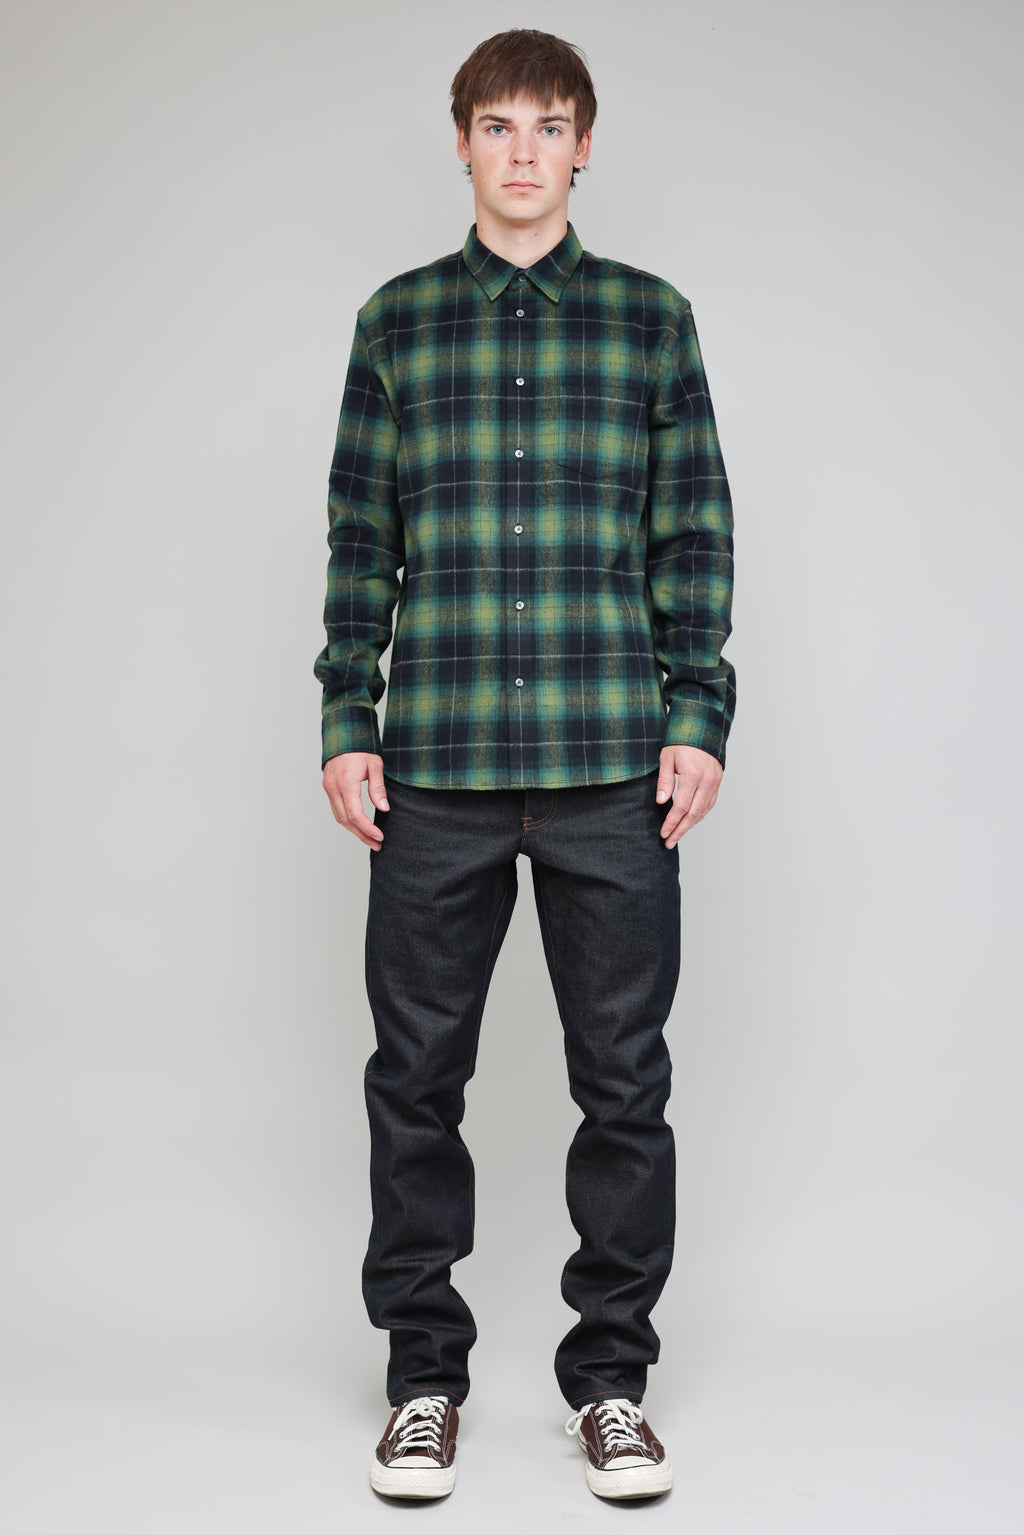 Japanese Shaggy Plaid in Green and Navy 05